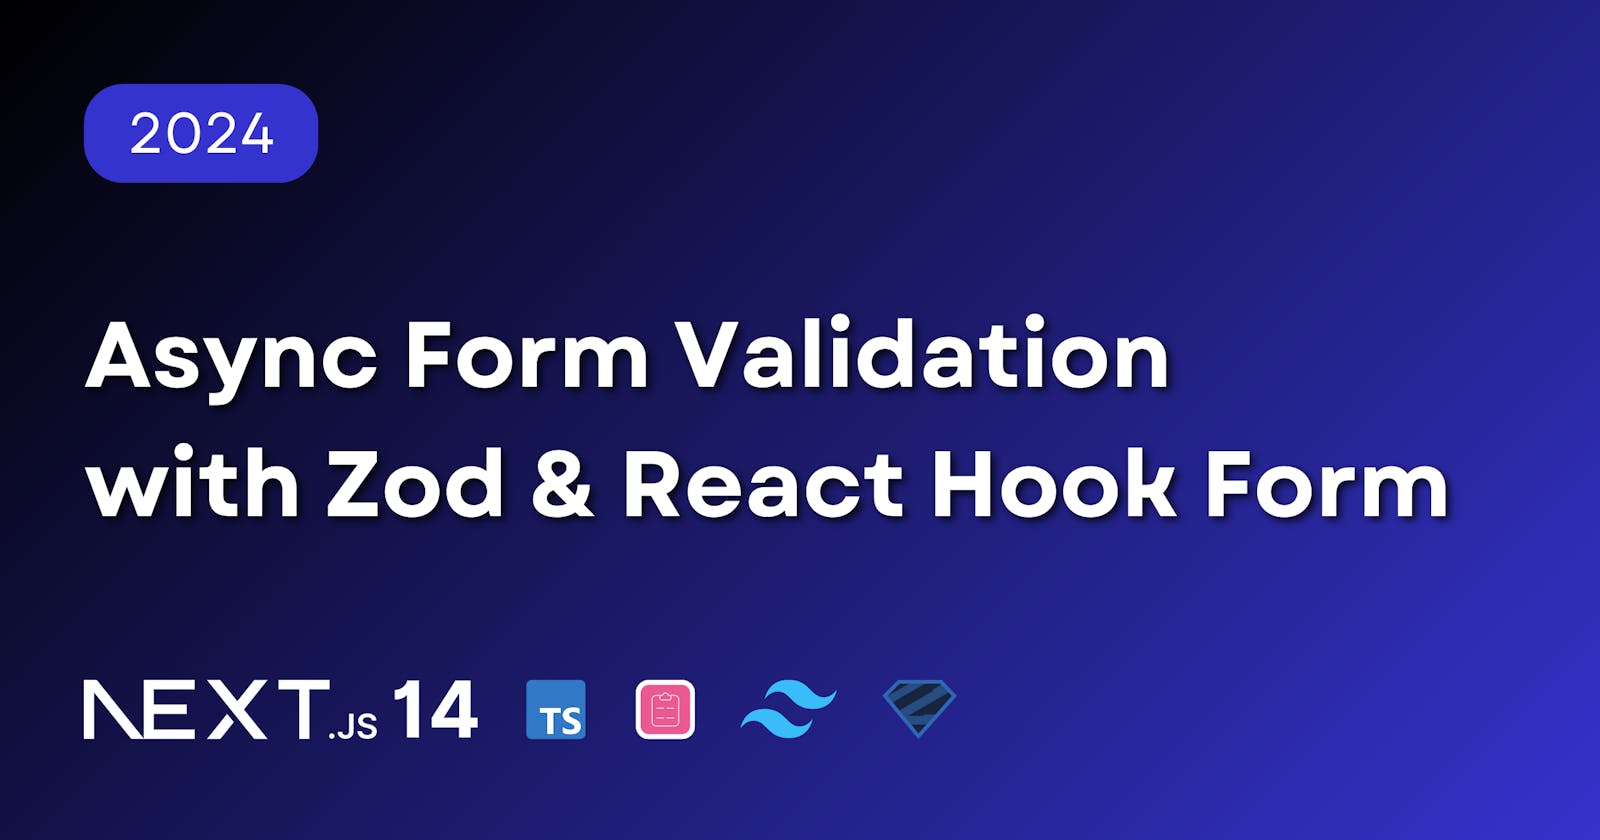 Async Form Validation with Zod & React Hook Form